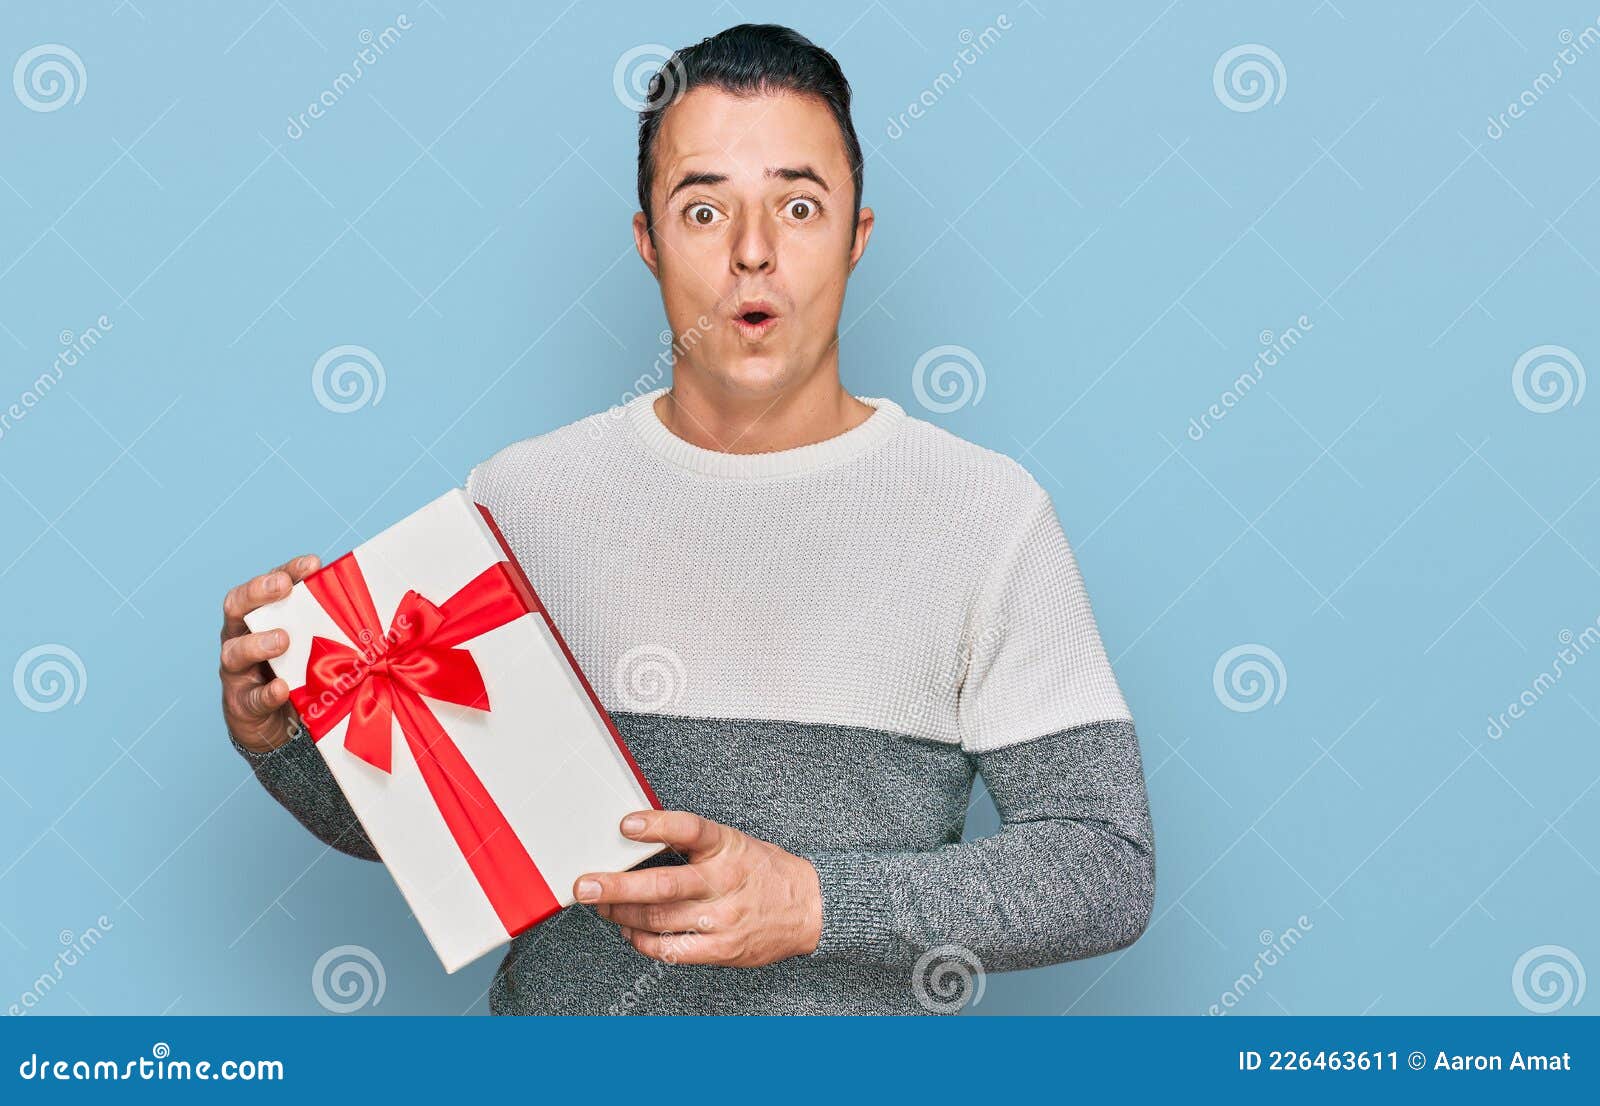 Handsome Young Man Holding Gift Scared and Amazed with Open Mouth for ...